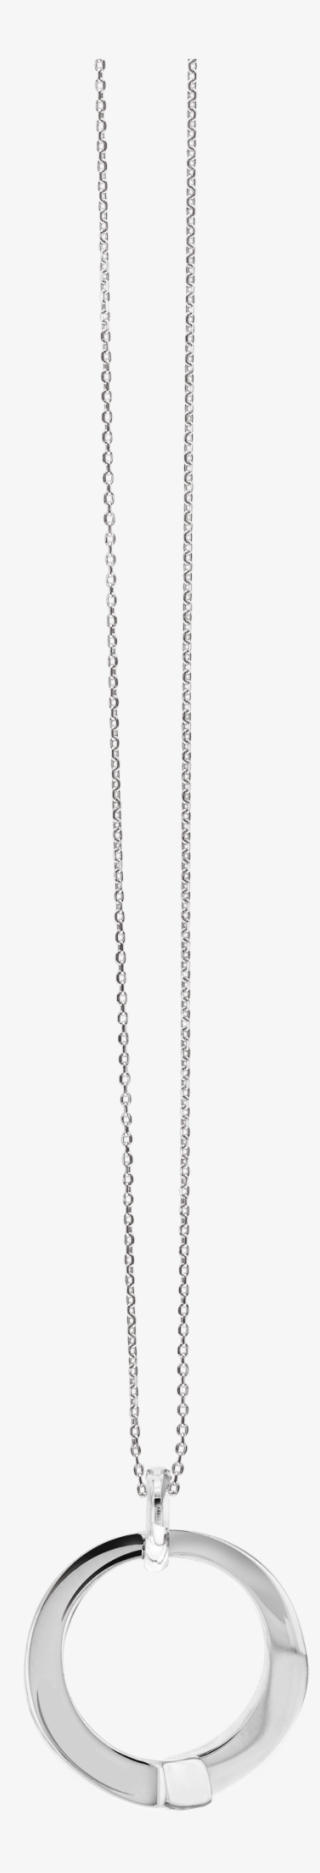 Quantum Cubus White Gold Plated Stainless Steel Pendant - Chain